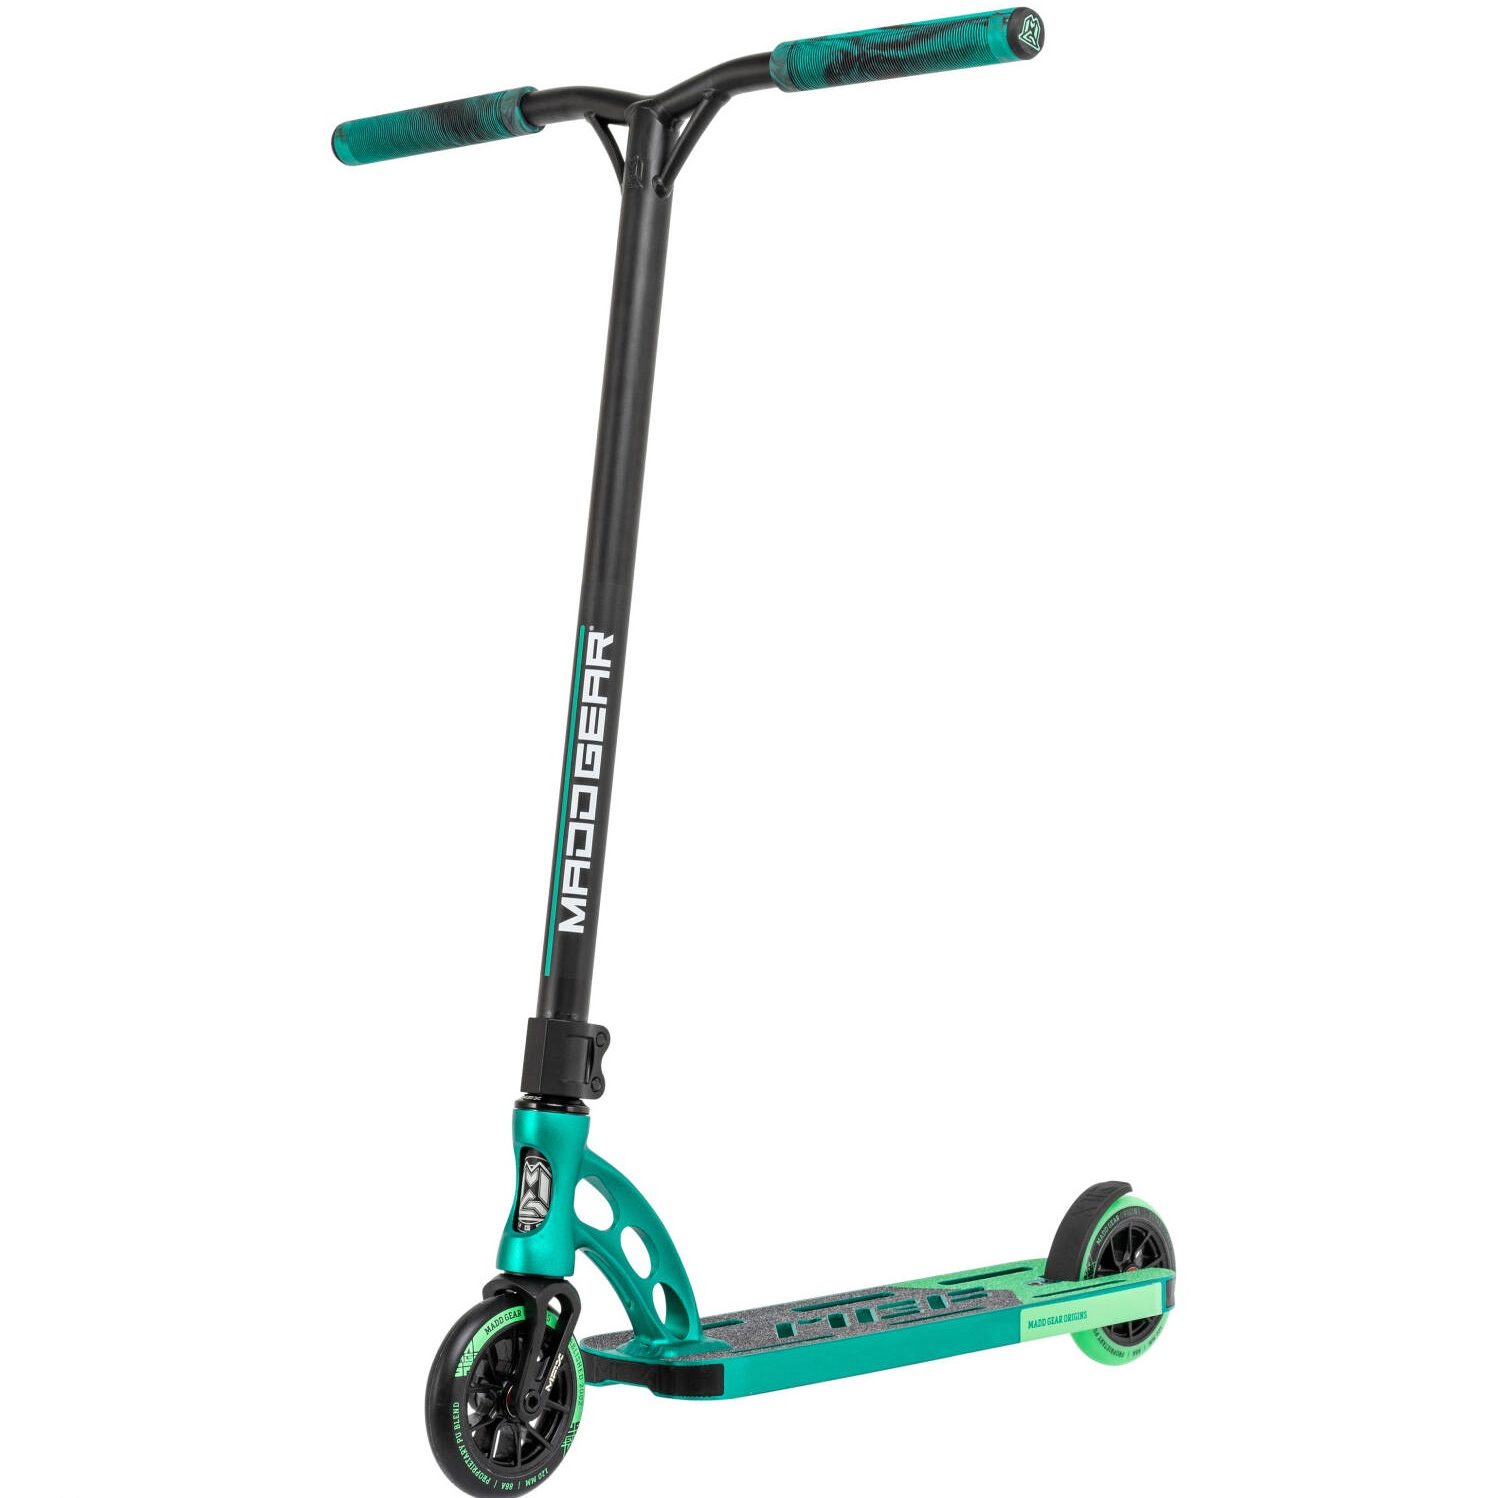 Stunt scooters